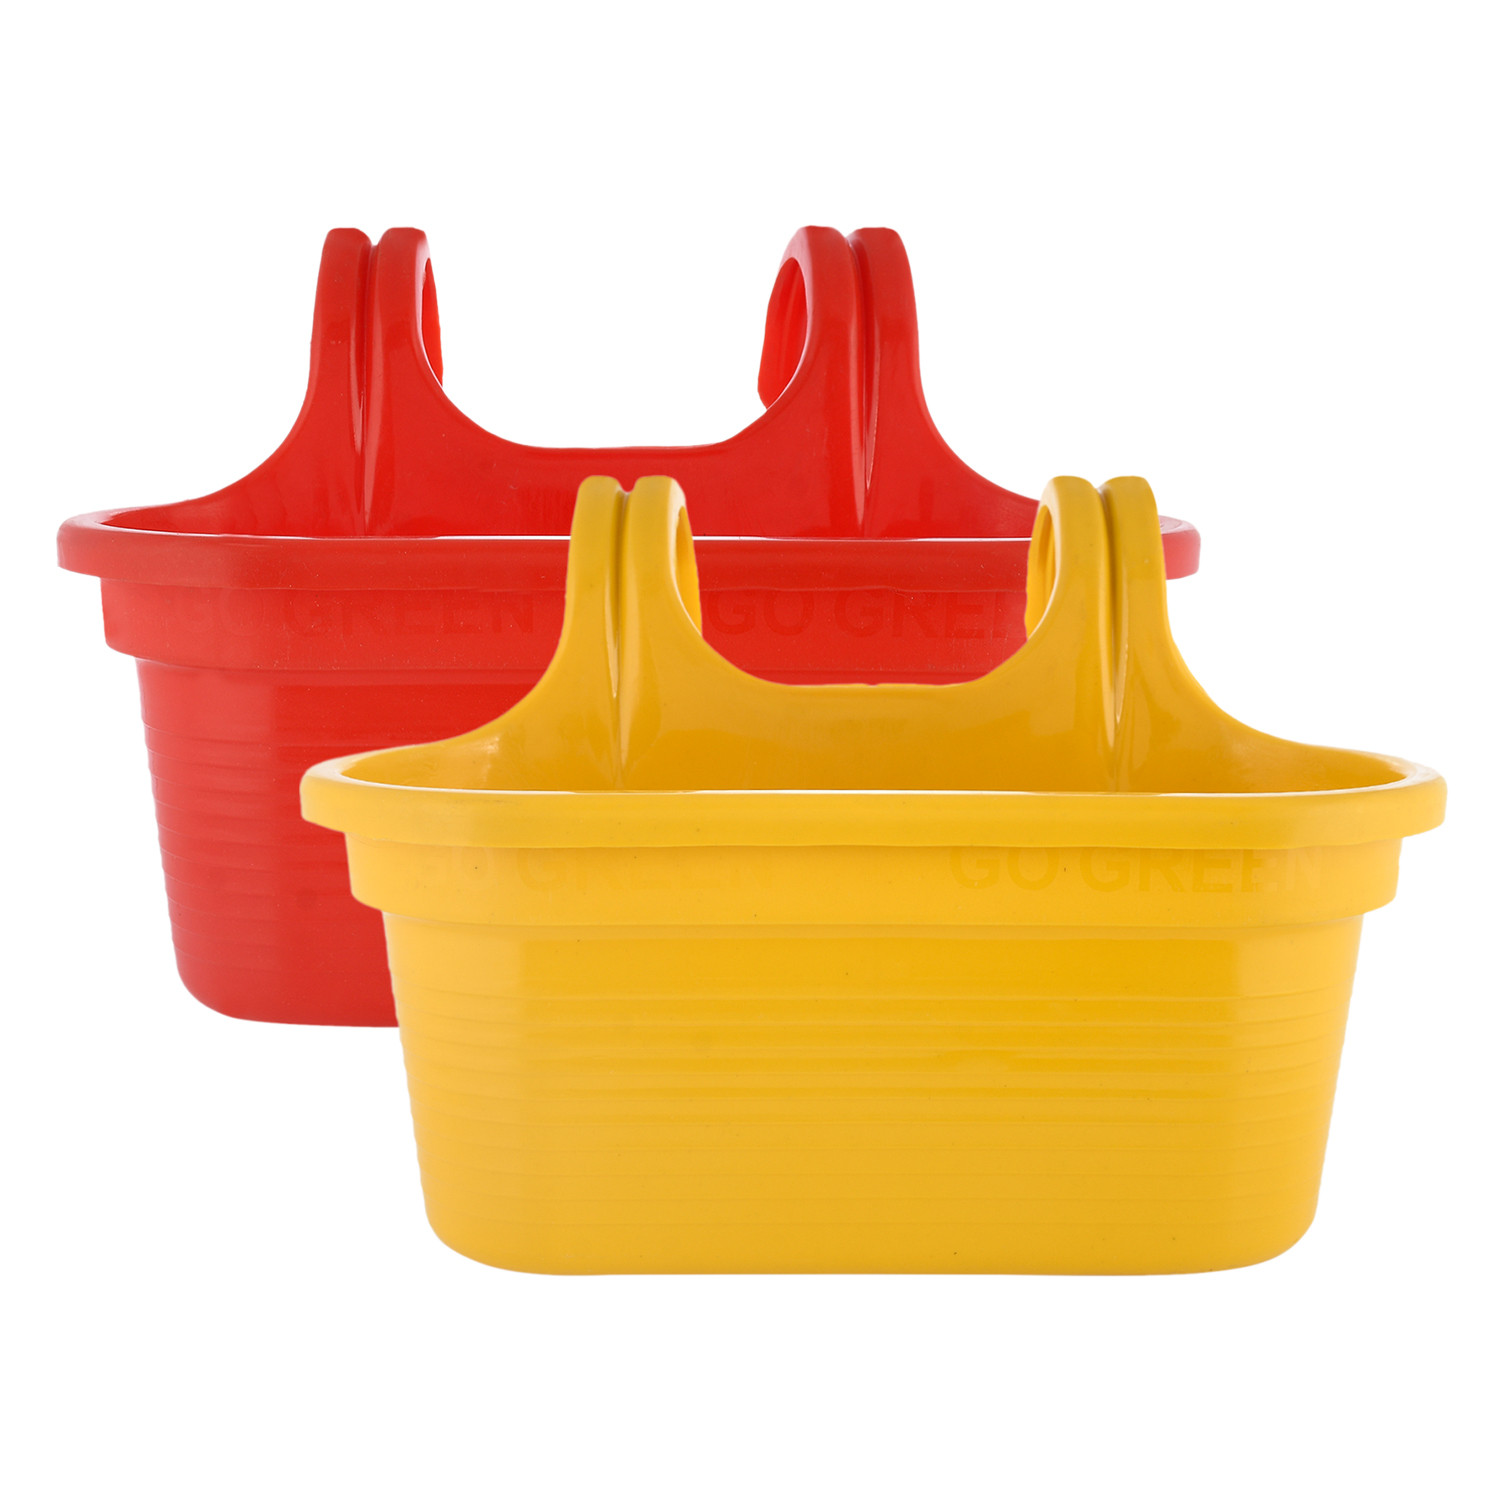 Kuber Industries Hanging Flower Pot|Double Hook Plant Container|Durable Plastic Glossy Finish Pots for Home|Balcony|Garden|12 Inch|Pack of 2 (Yellow & Red)